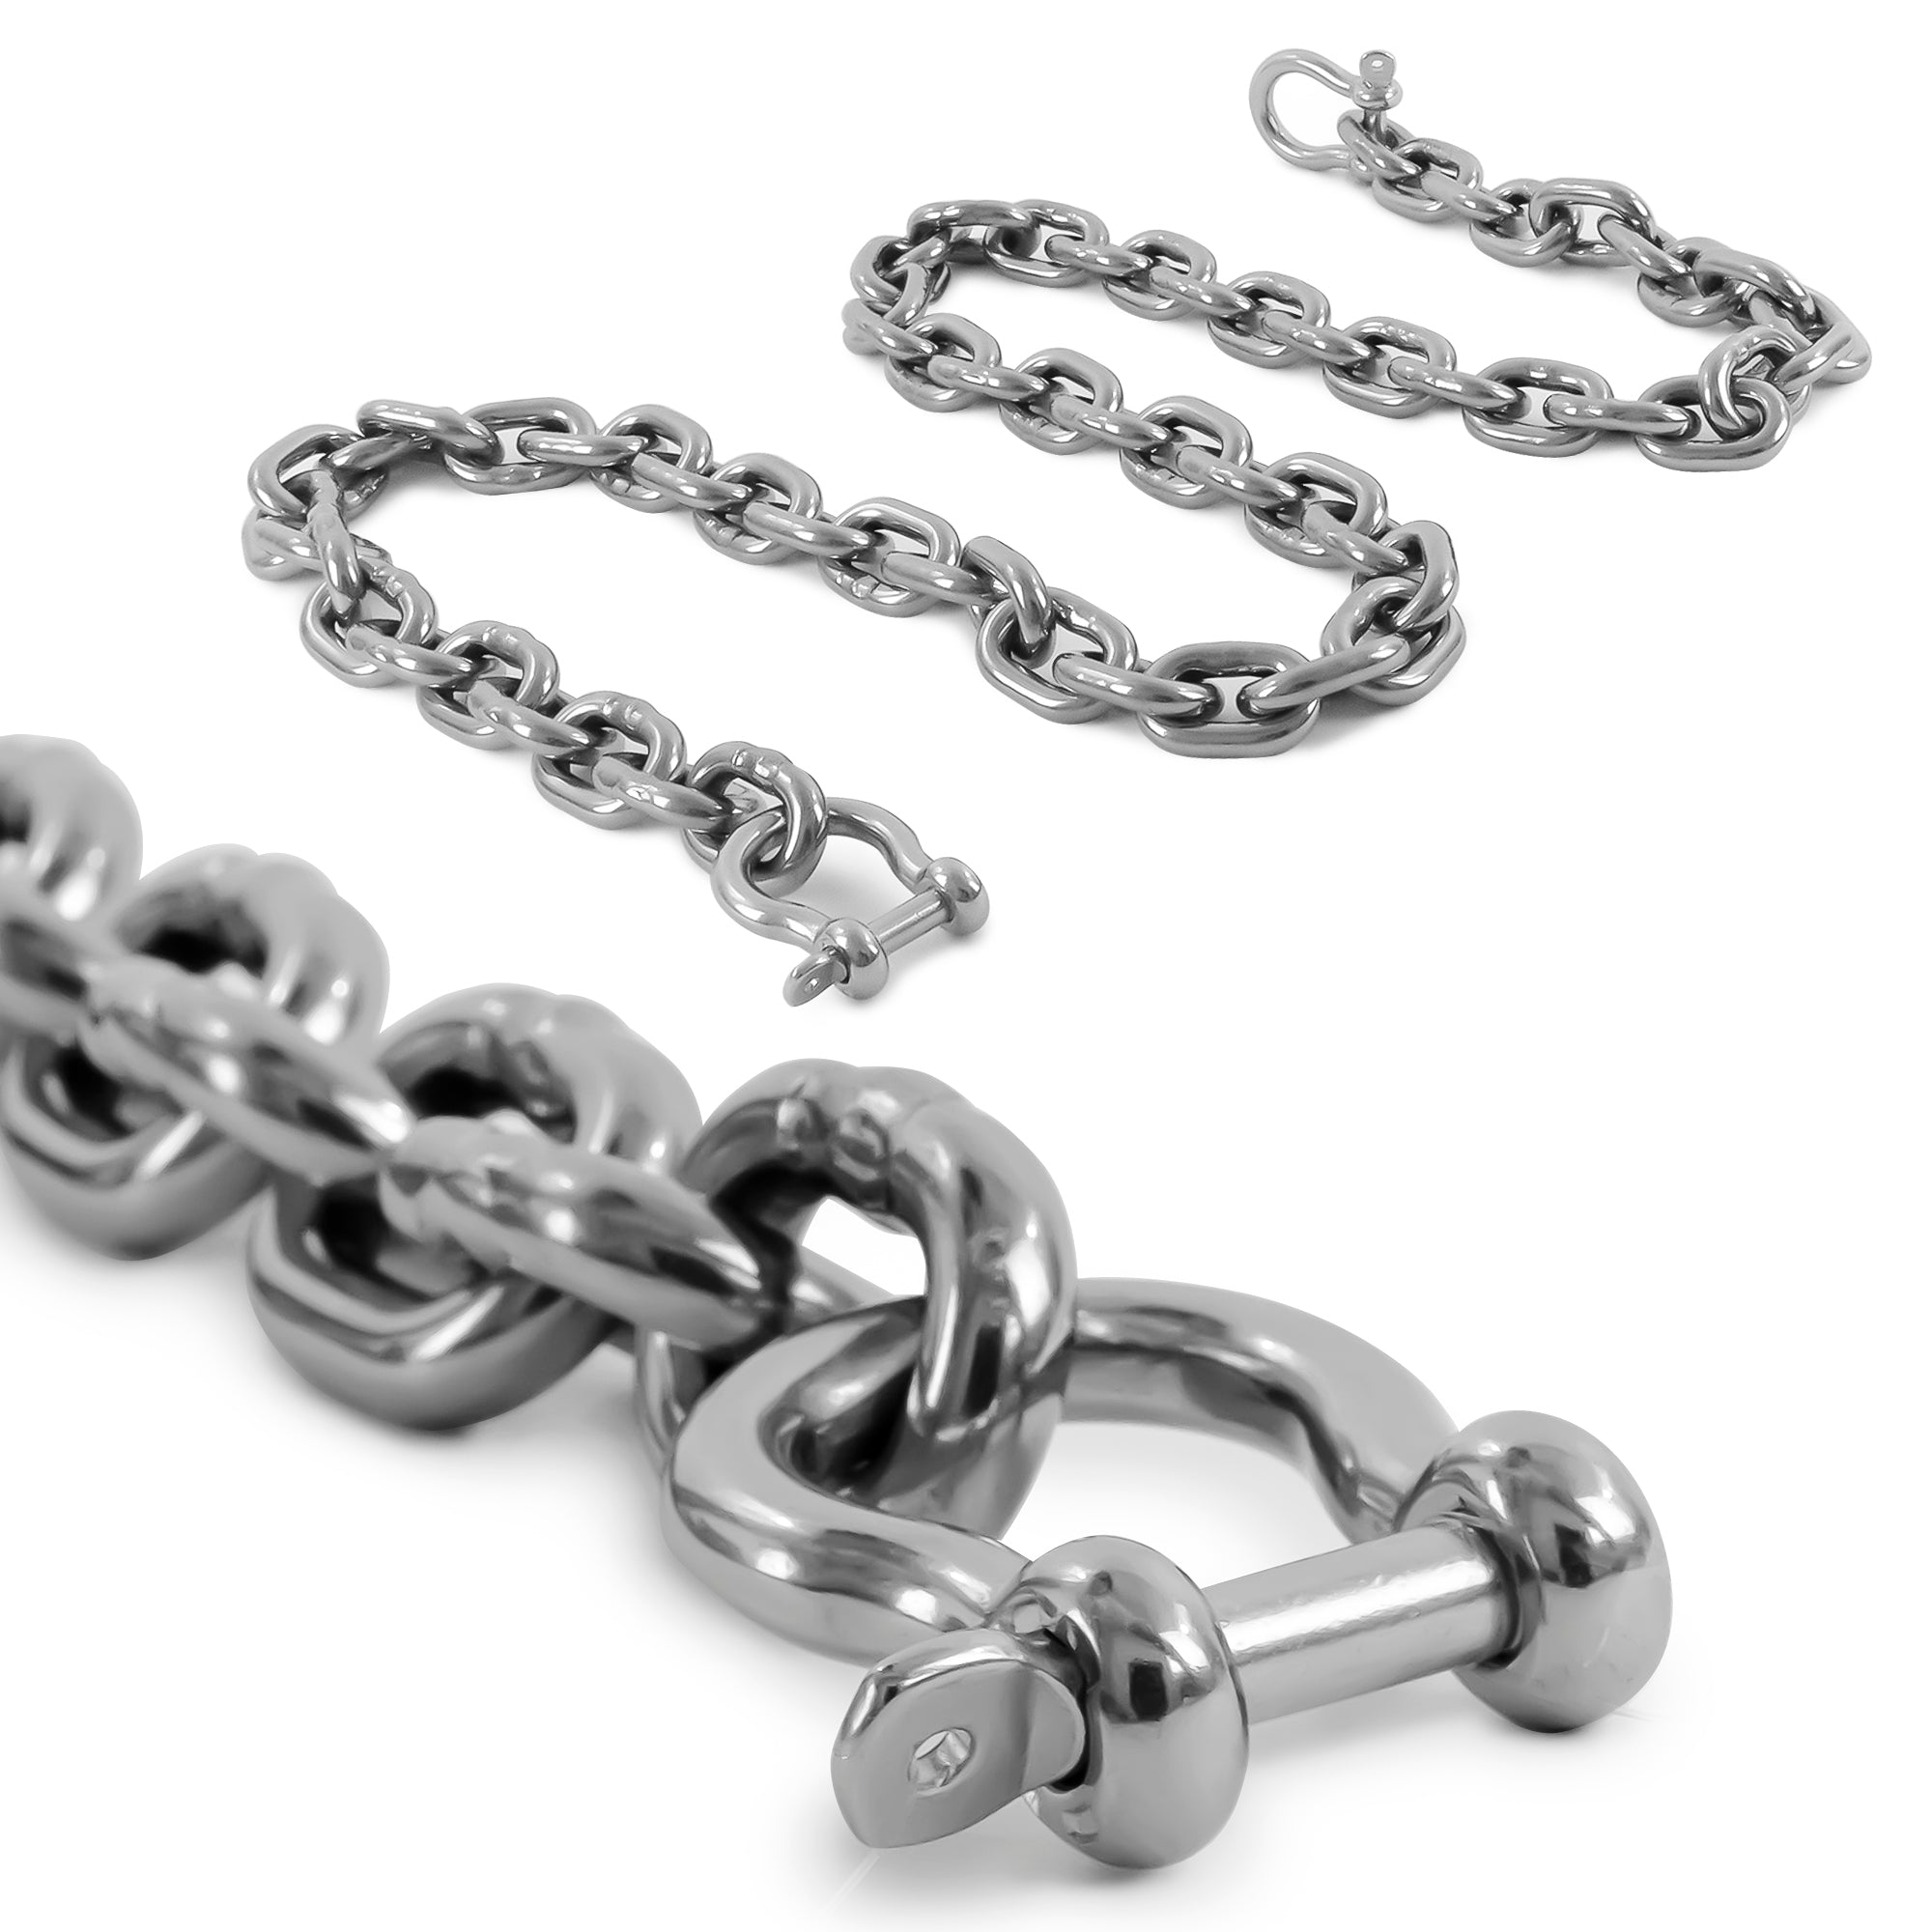 Boat Anchor Lead Chain with Shackle, 5/16" x 5', HTG4 Stainless Steel - FO4493-S5